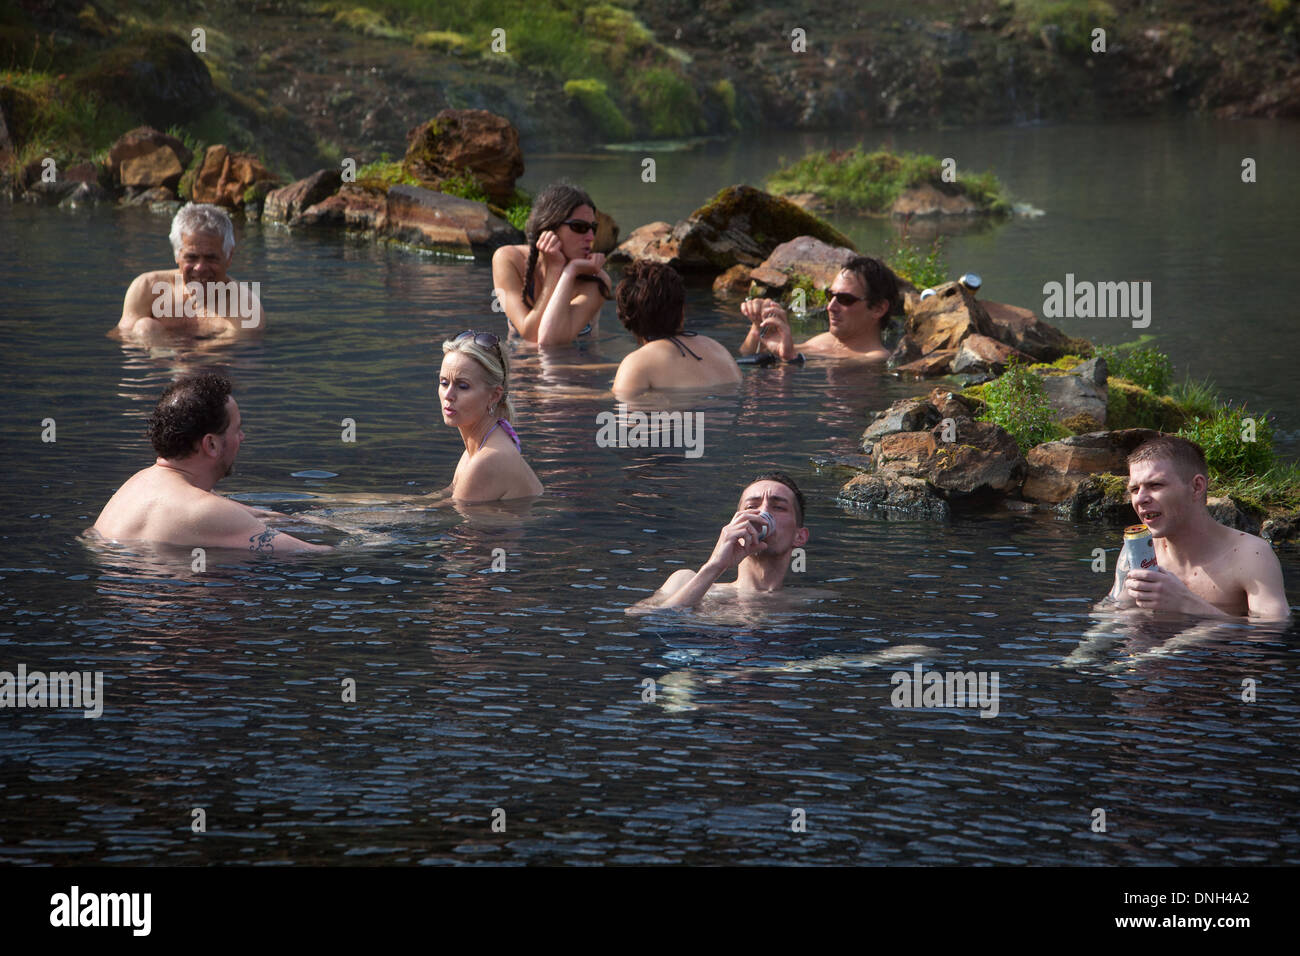 BATHING IN A NATURAL HOT SPRING, VOLCANIC AND GEOTHERMAL ZONE OF LANDMANNALAUGAR, THE NAME LITERALLY MEANS 'HOT BATHS OF THE PEOPLE OF THE LAND', REGION OF THE HIGH PLATEAUS, SOUTHERN ICELAND, EUROPE Stock Photo